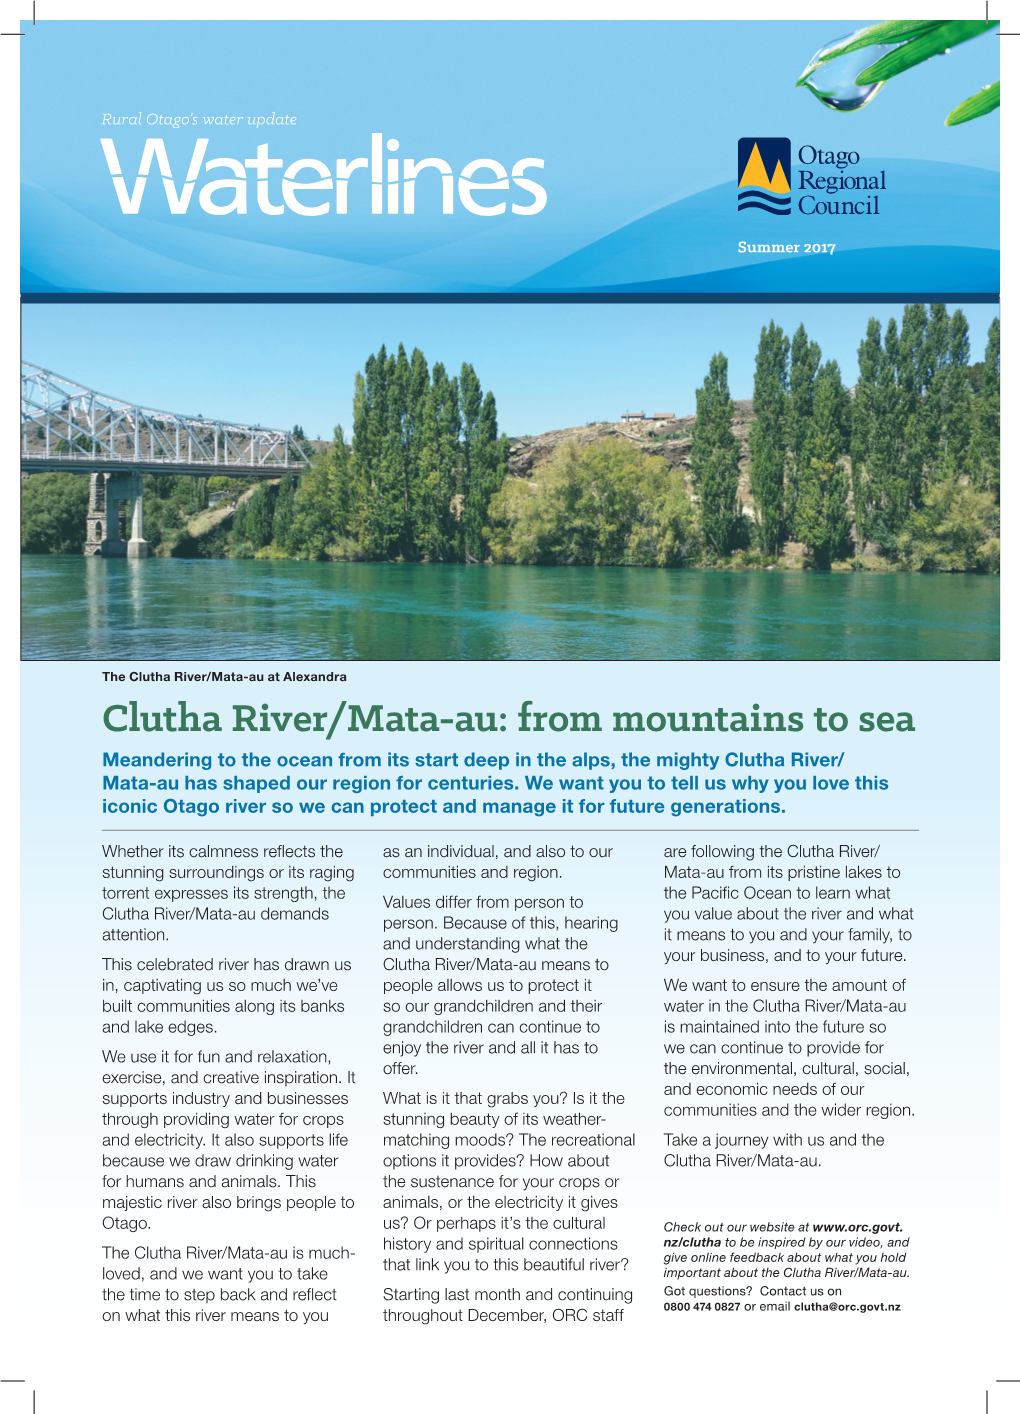 Clutha River/Mata-Au: from Mountains To